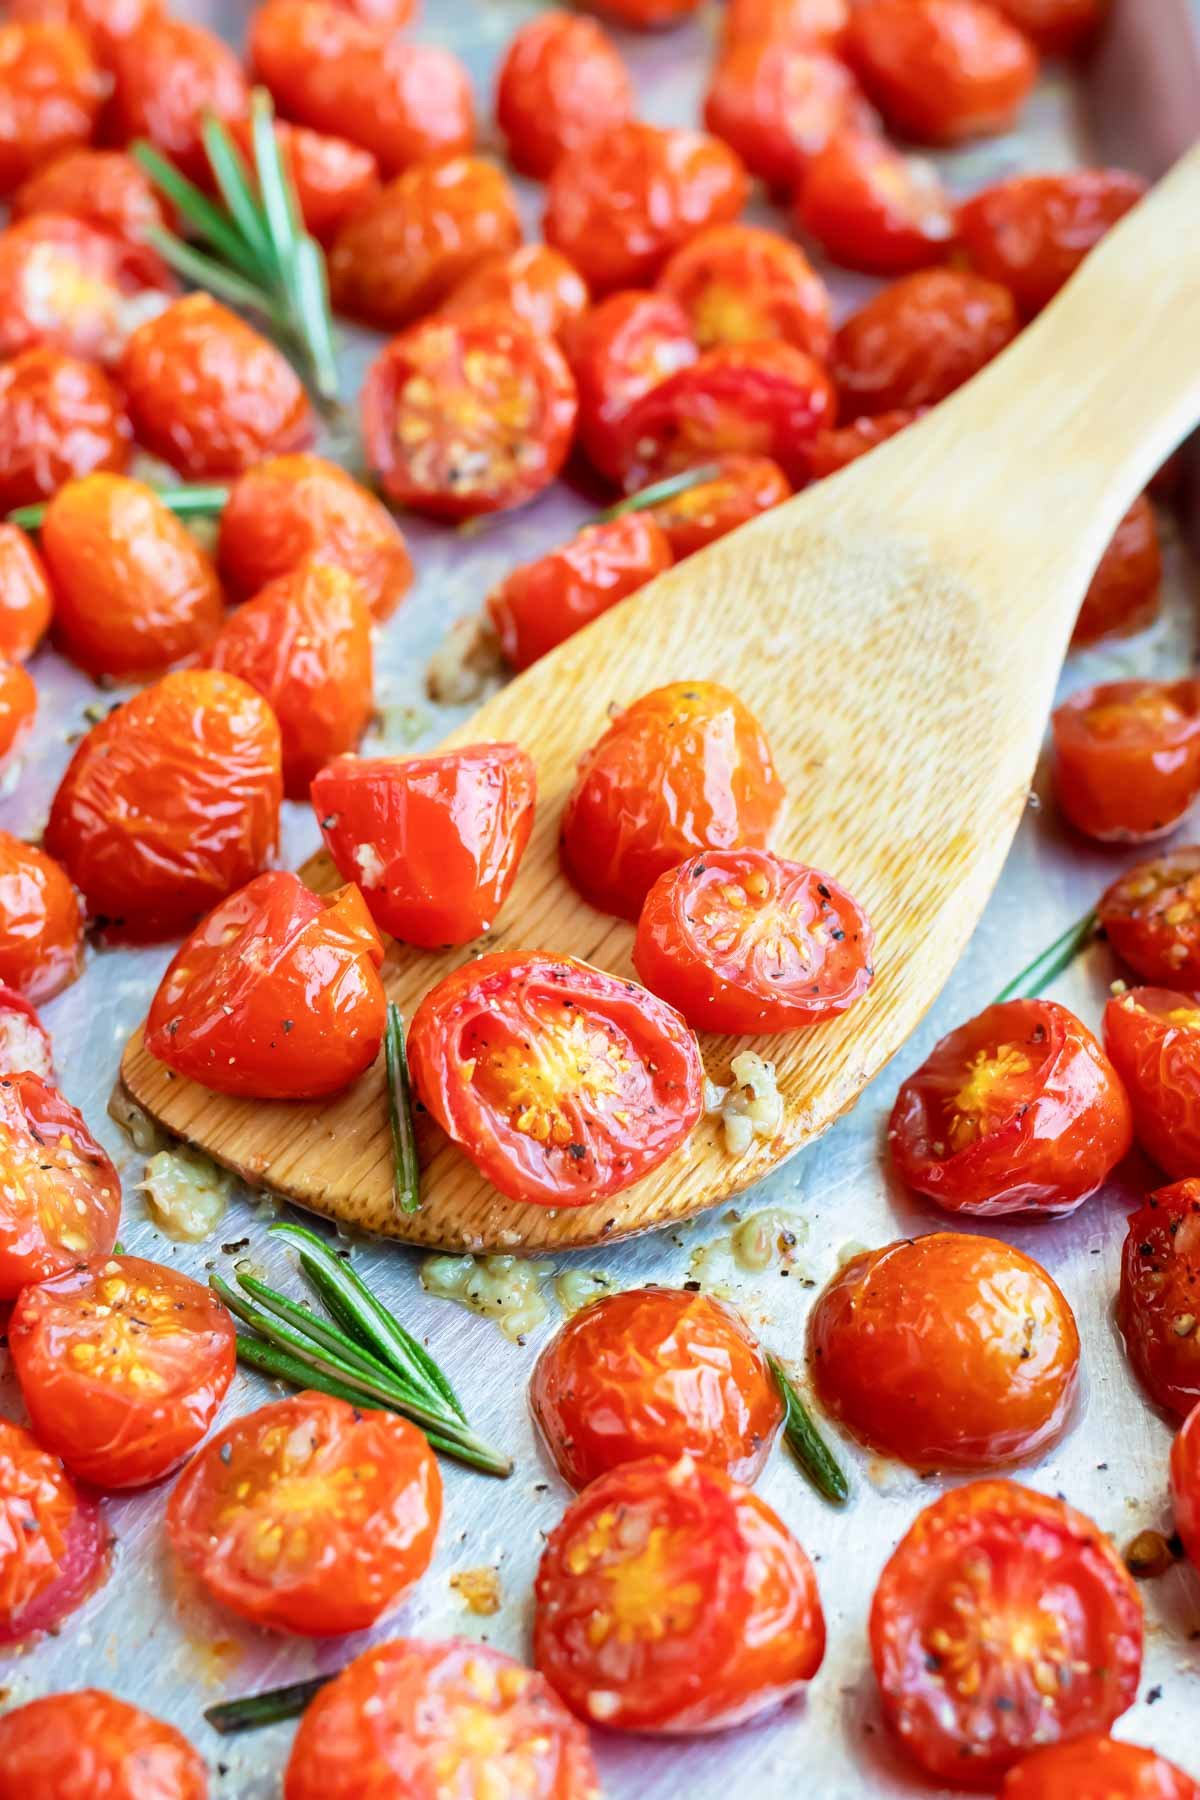 A wooden spatula scooping up roasted cherry tomatoes from a baking sheet.